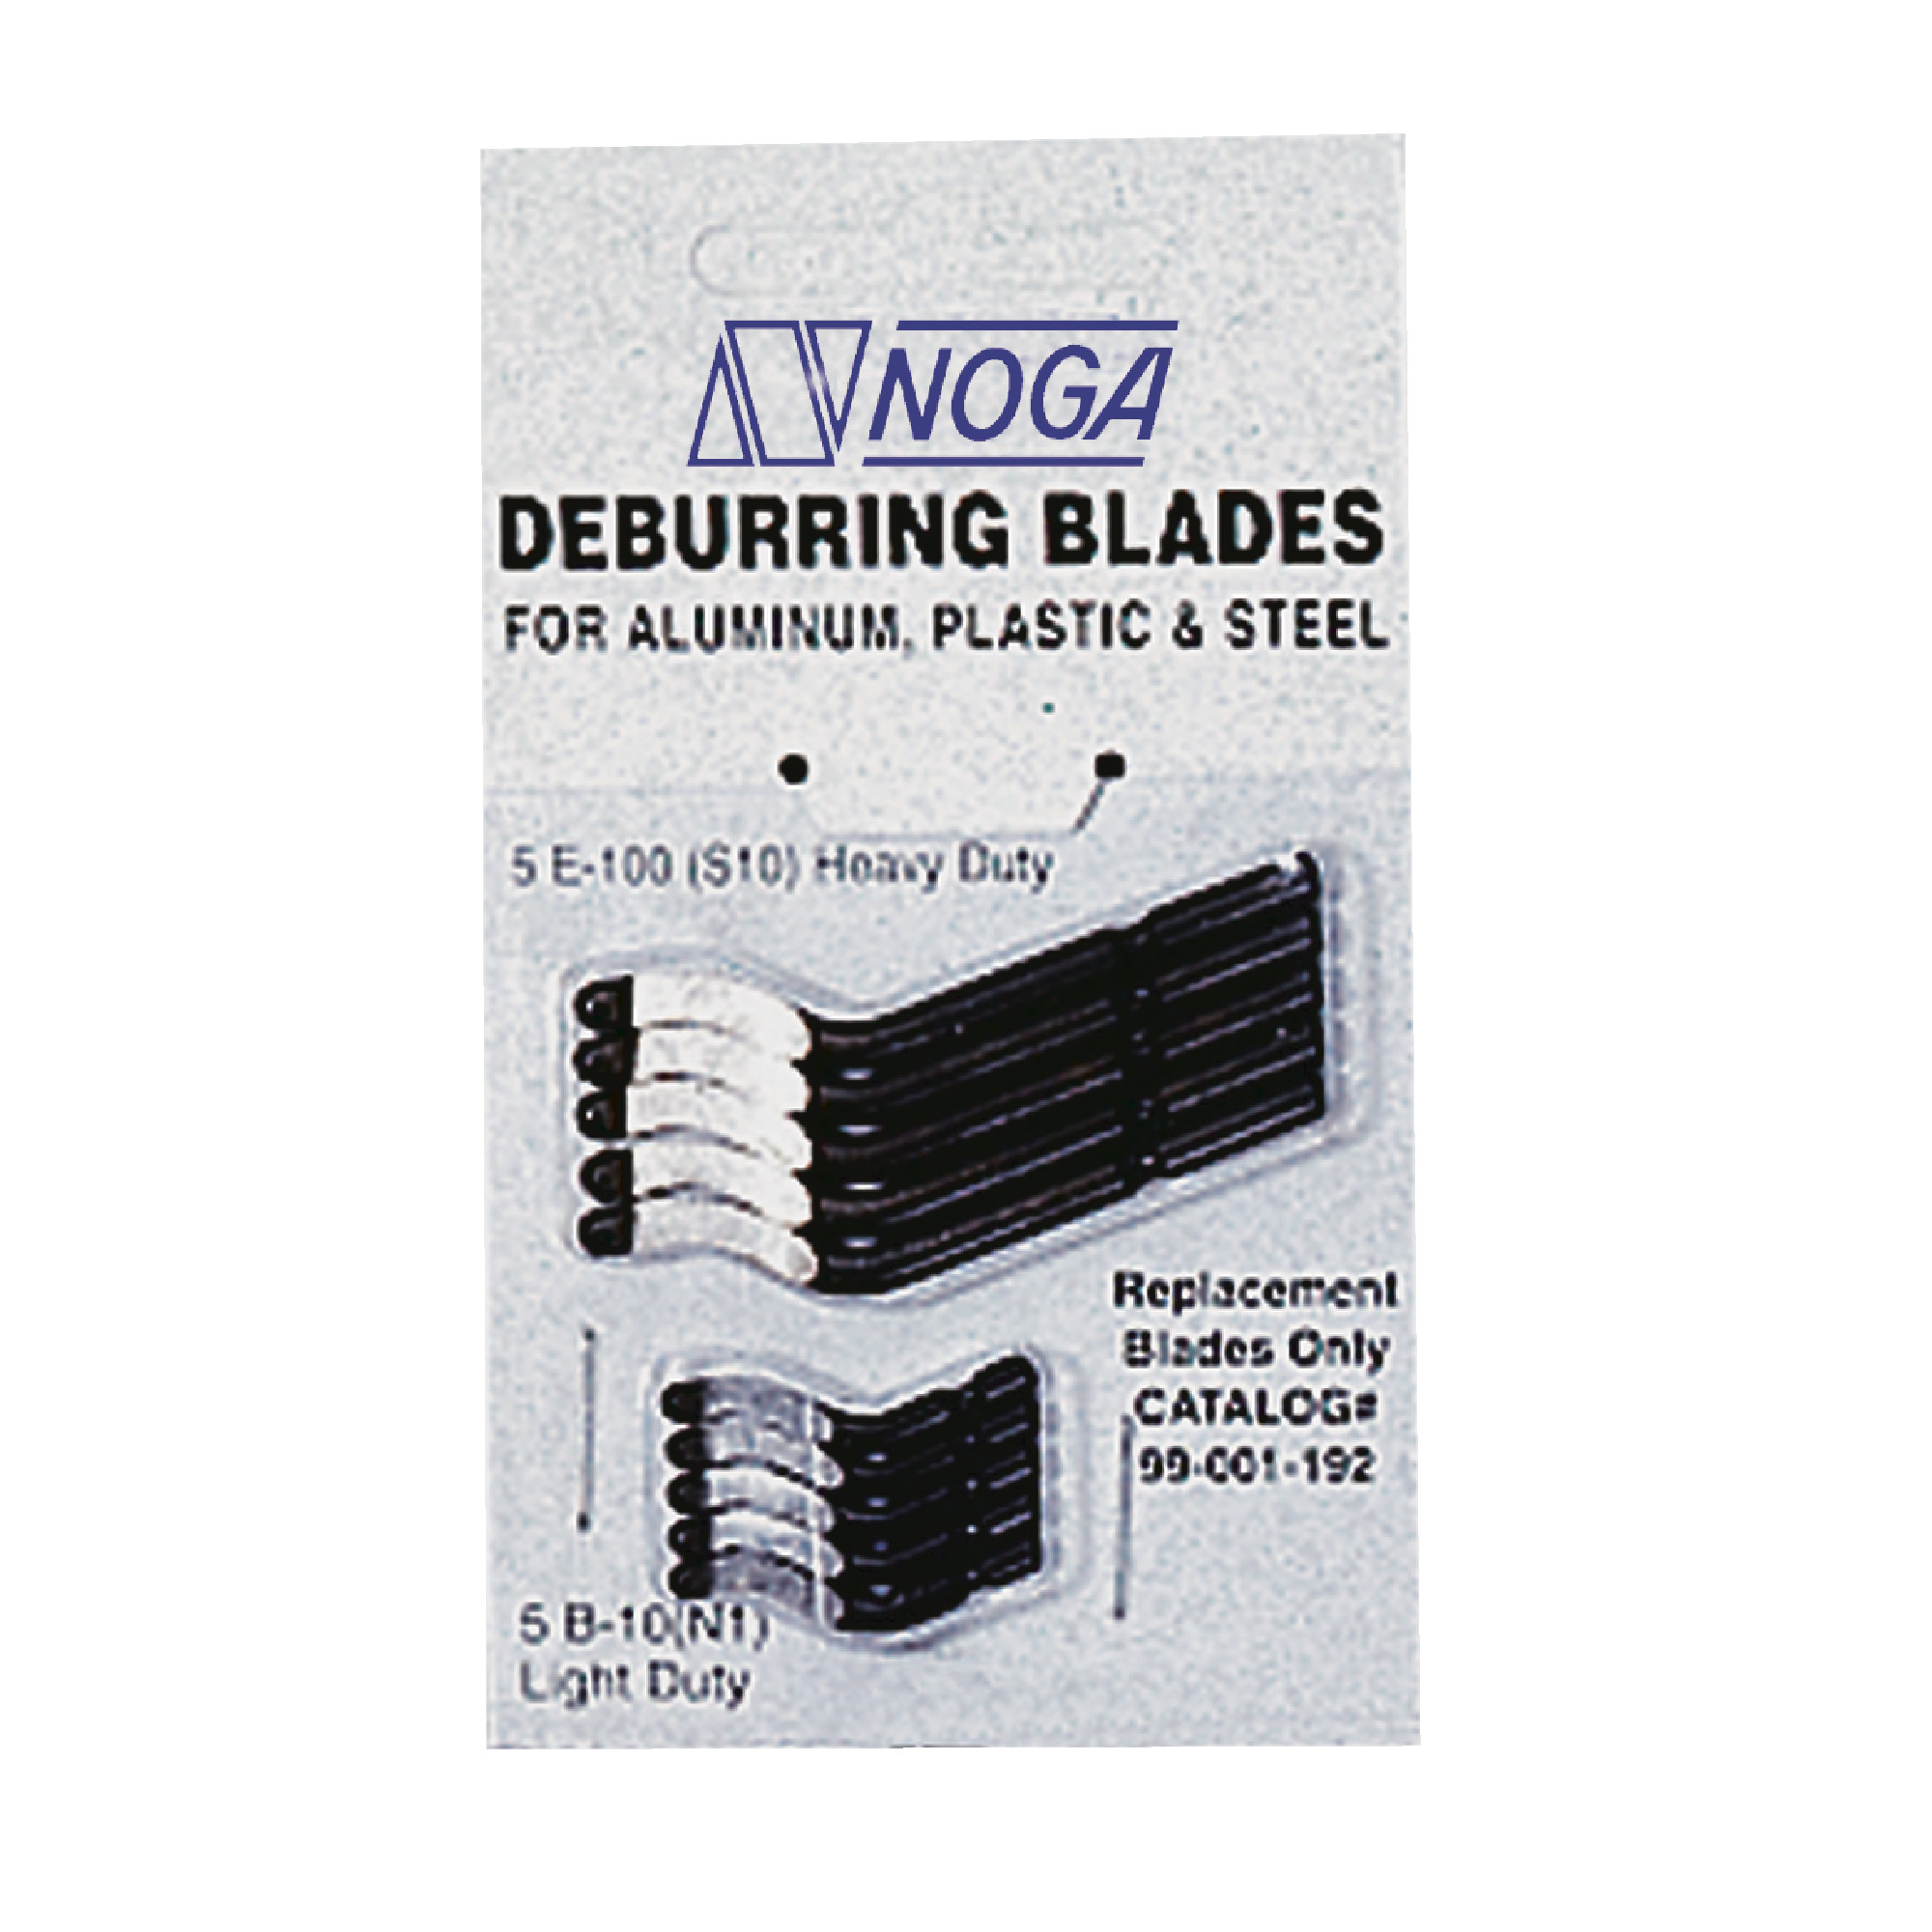 Replacement Deburring Blades